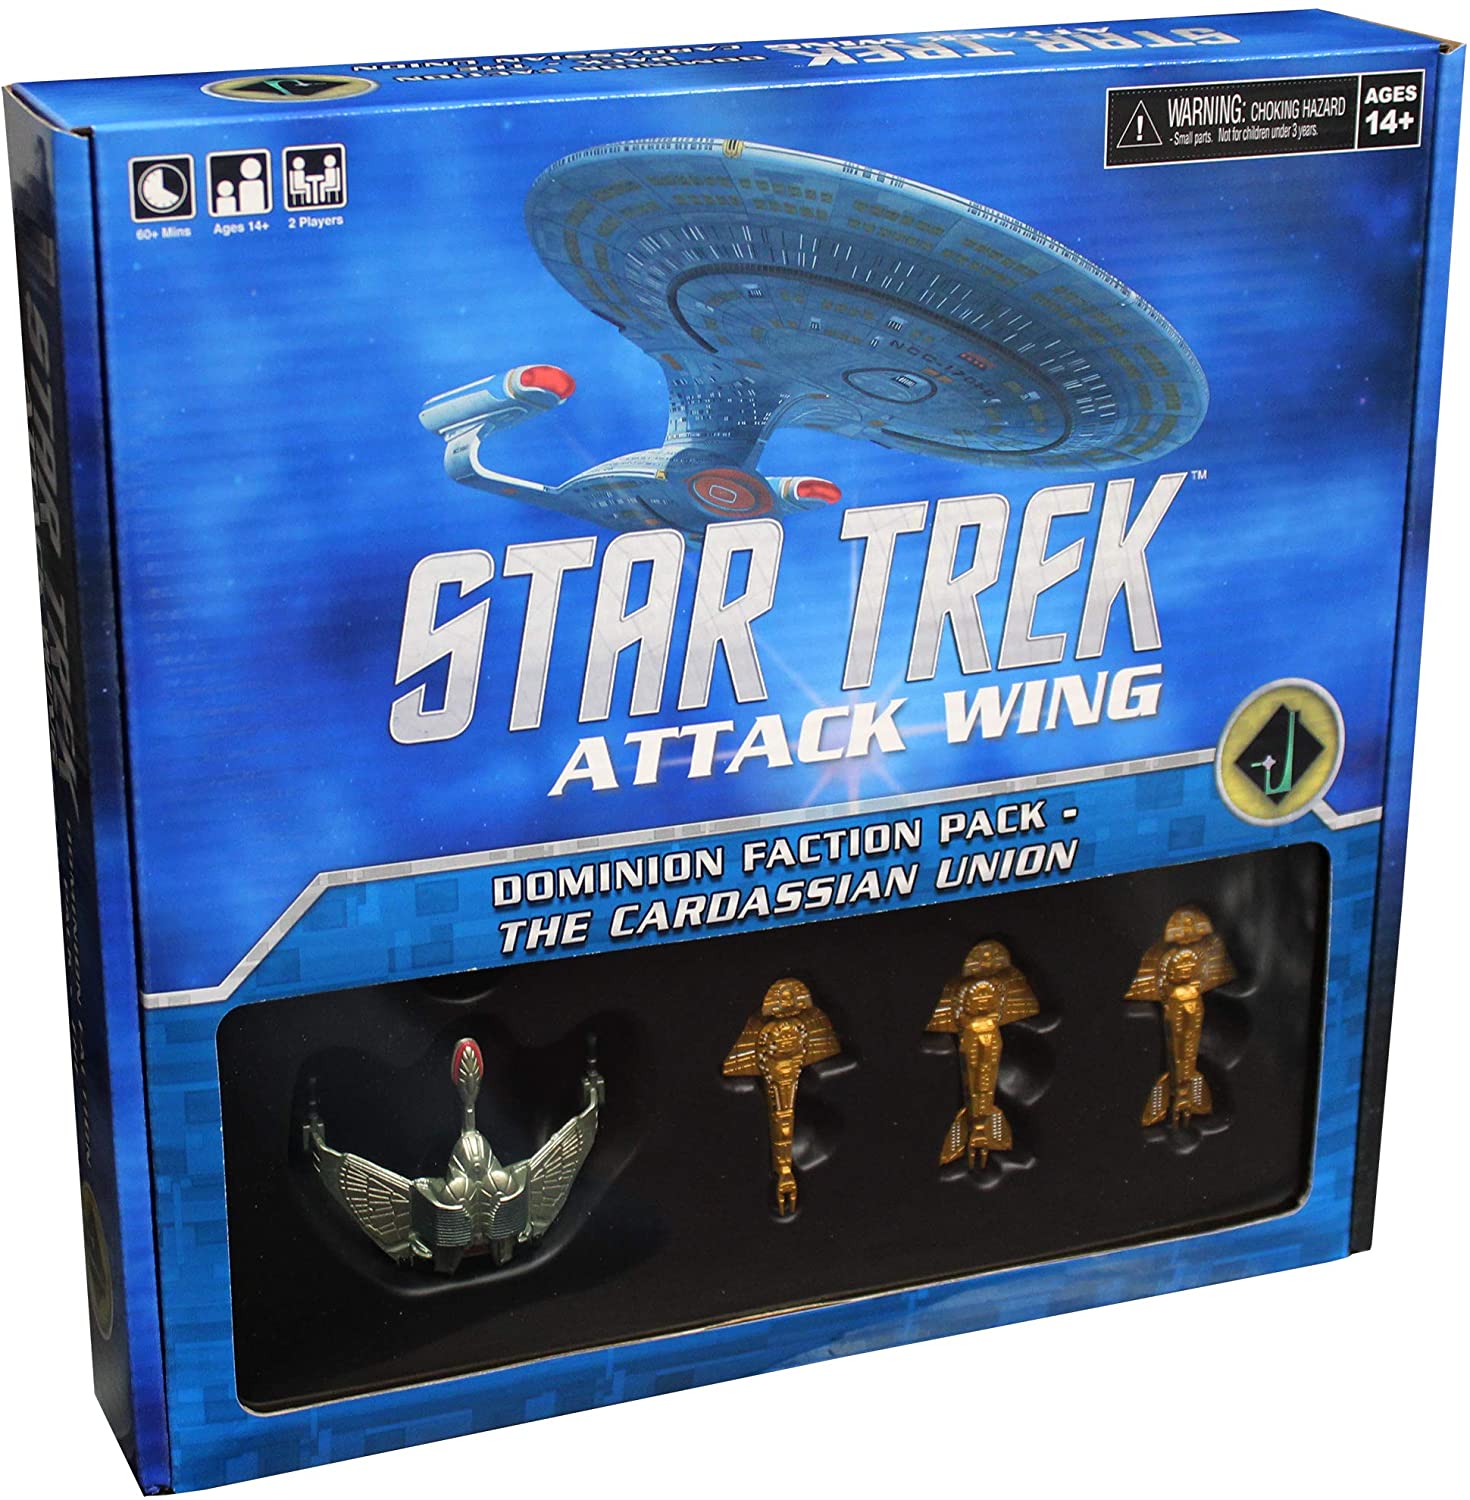 Star Trek: Attack Wing - Dominion Faction Pack: The Cardassian Union